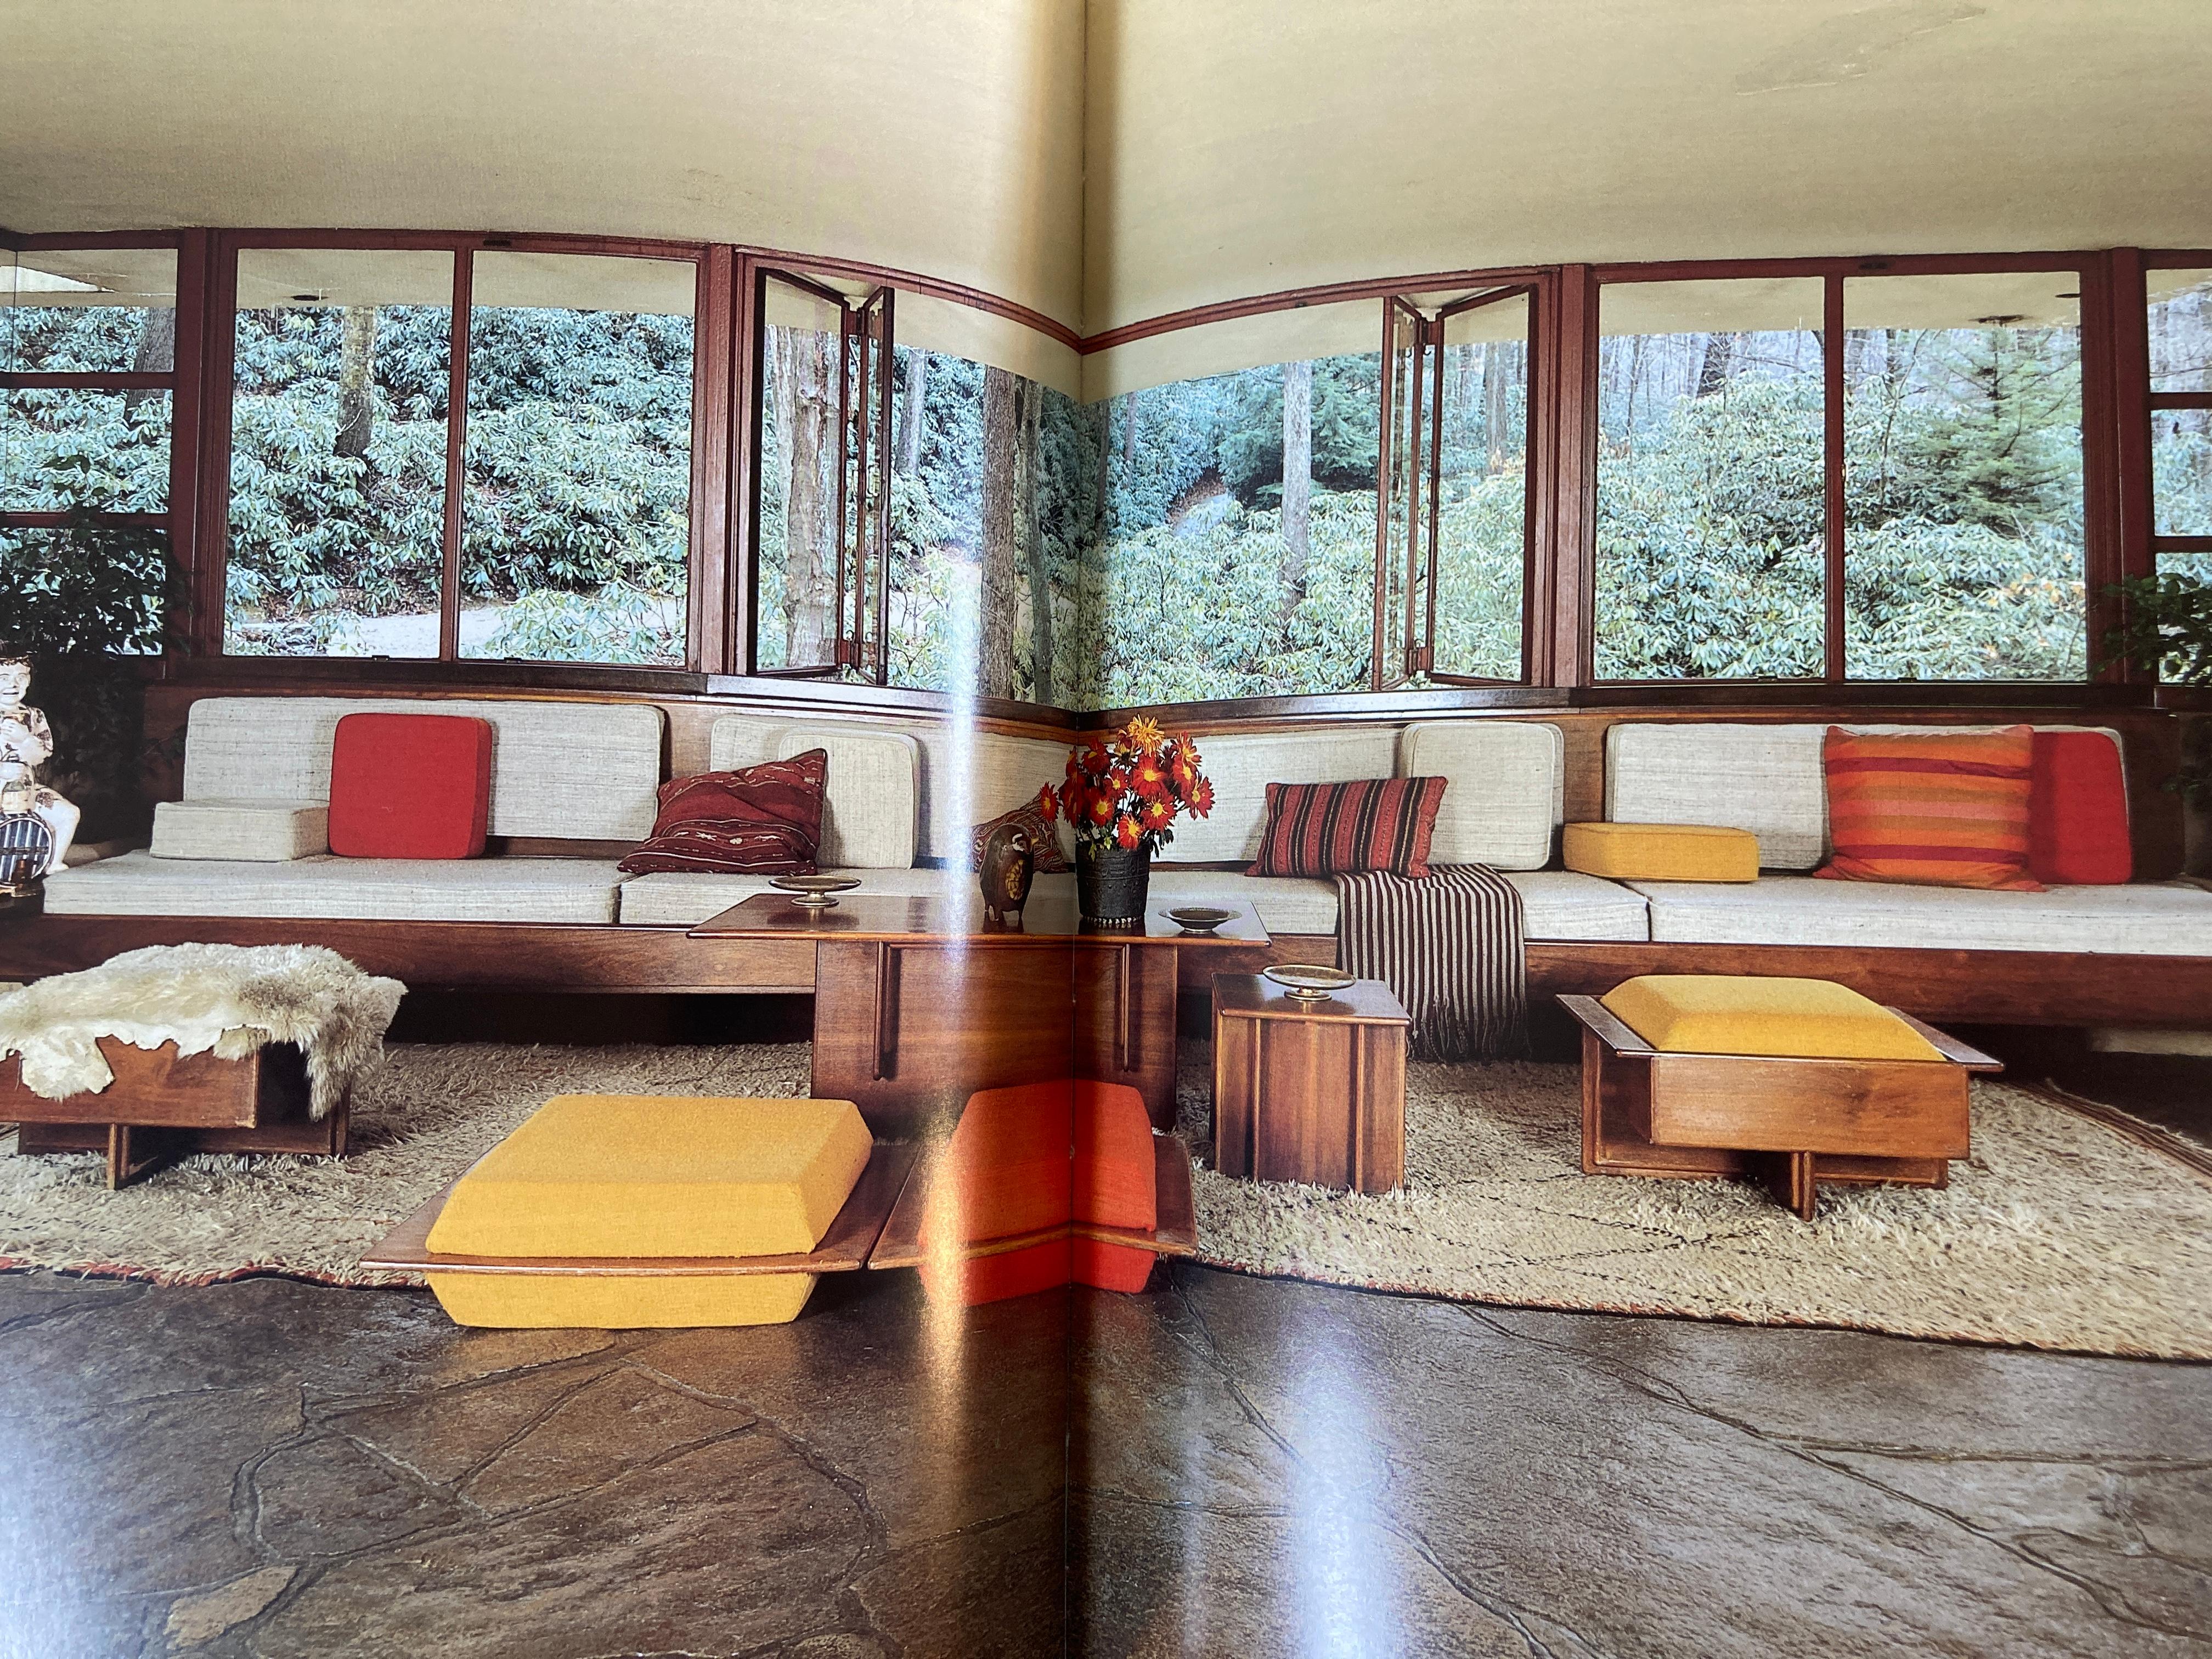 Fallingwater A Frank Lloyd Wright Country House by Edgar Kaufmann Book, 1986 In Good Condition For Sale In North Hollywood, CA